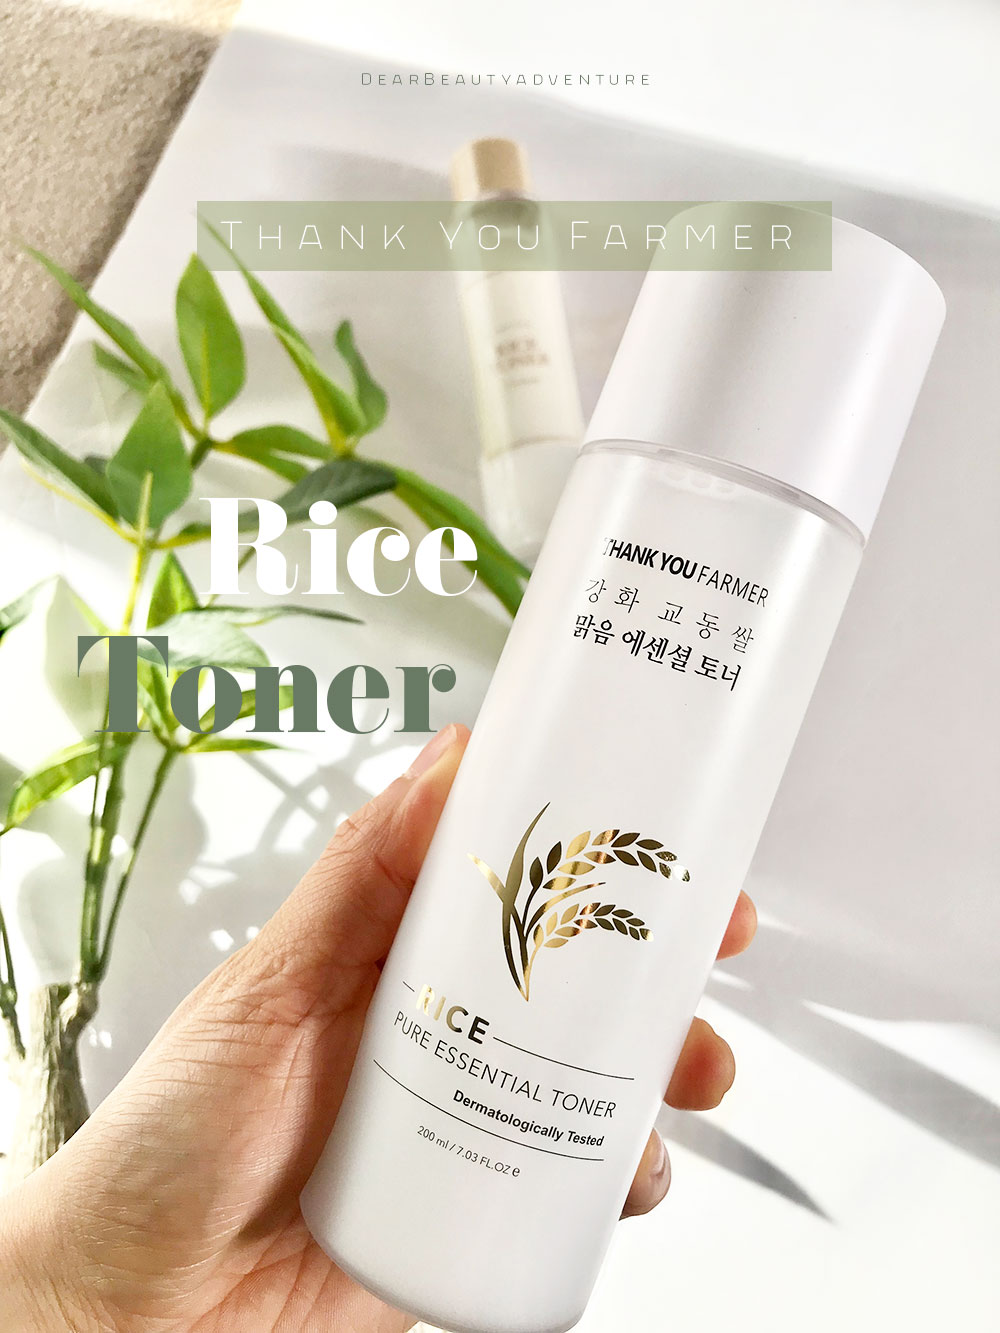 Thank you farmer rice toner review